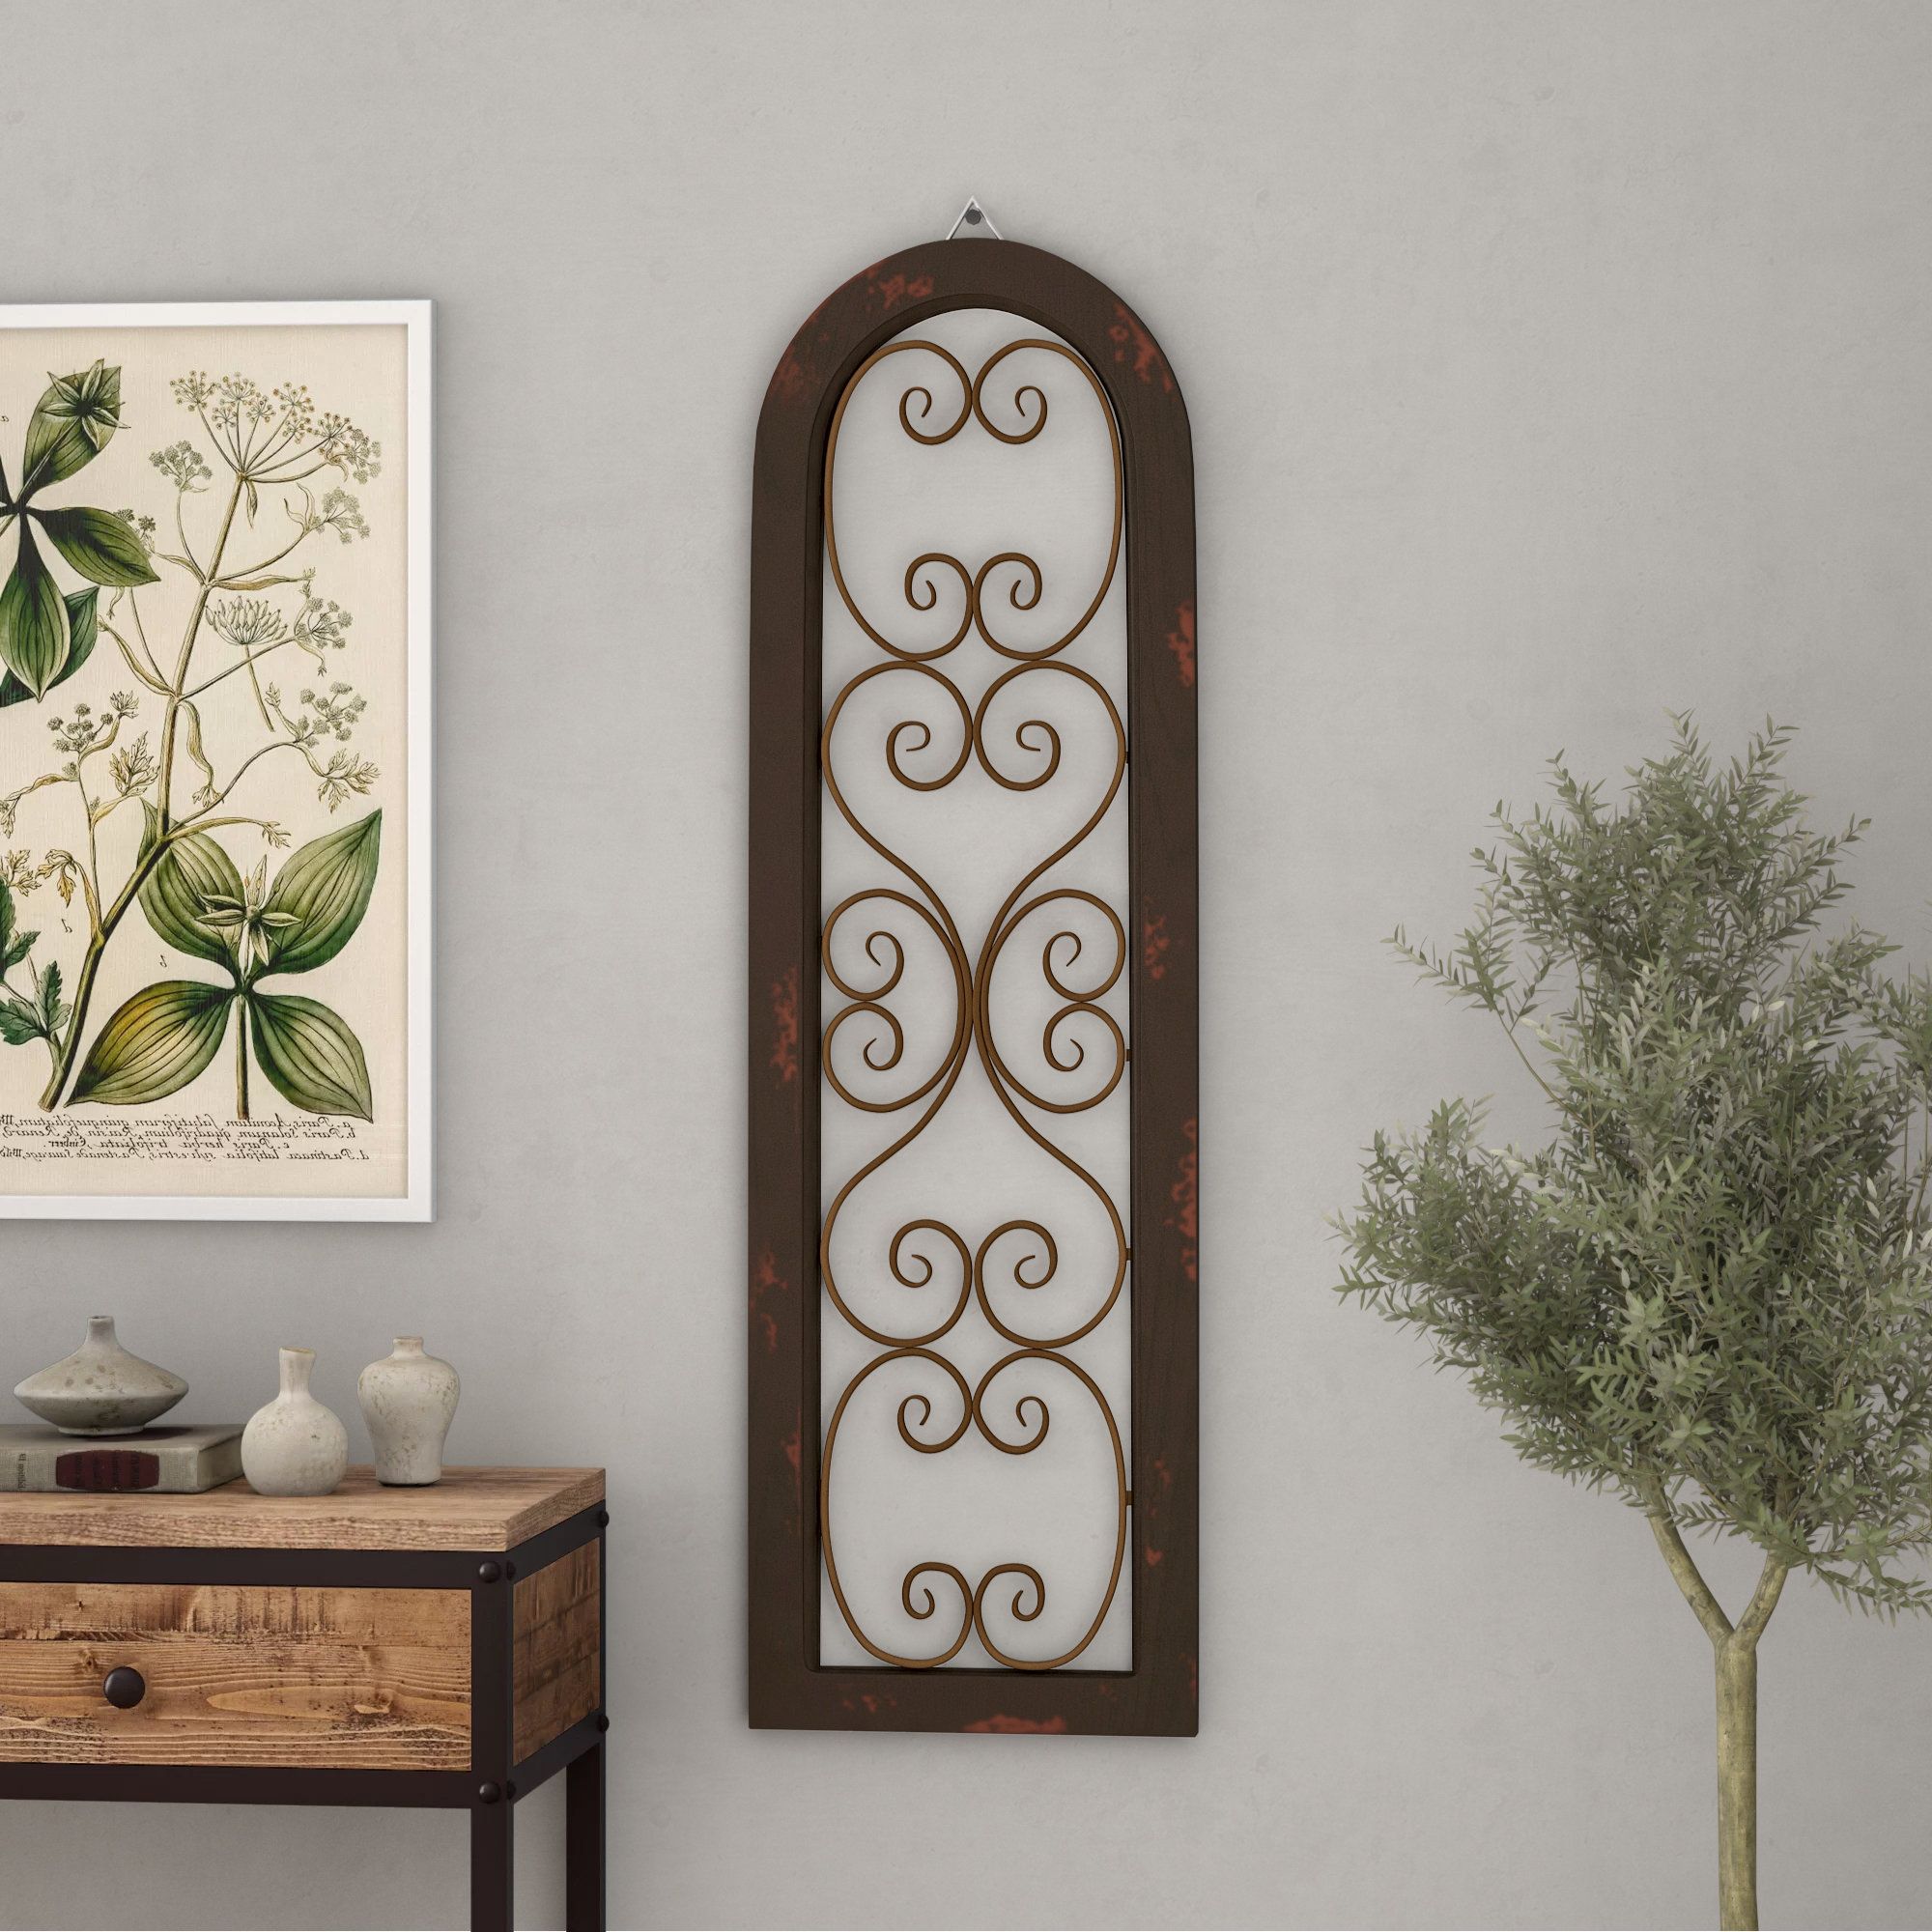 Wayfair With Regard To Recent Maxwell Wood And Metal Wall Decor (View 2 of 20)